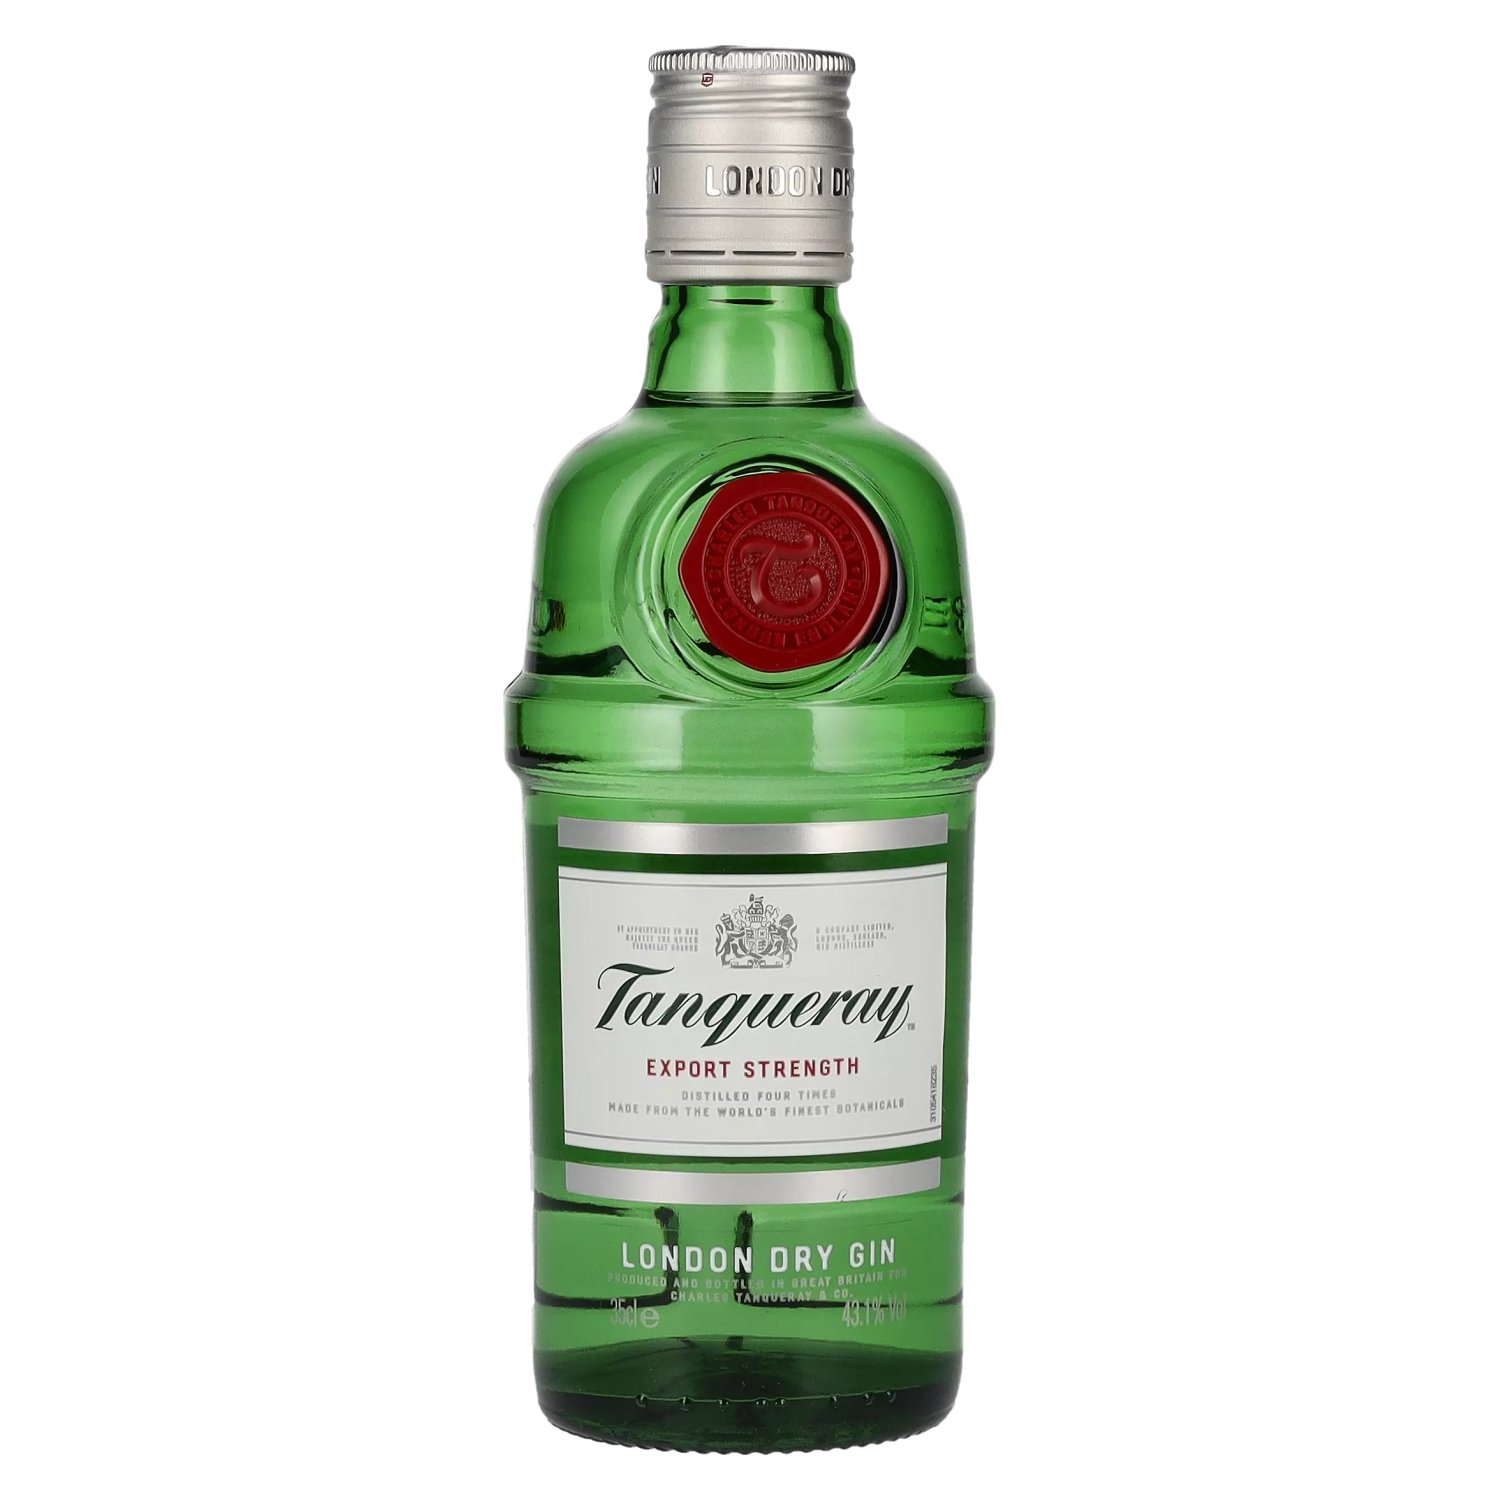 DRY Tanqueray 43,1% LONDON Export Vol. 0,35l GIN Strength